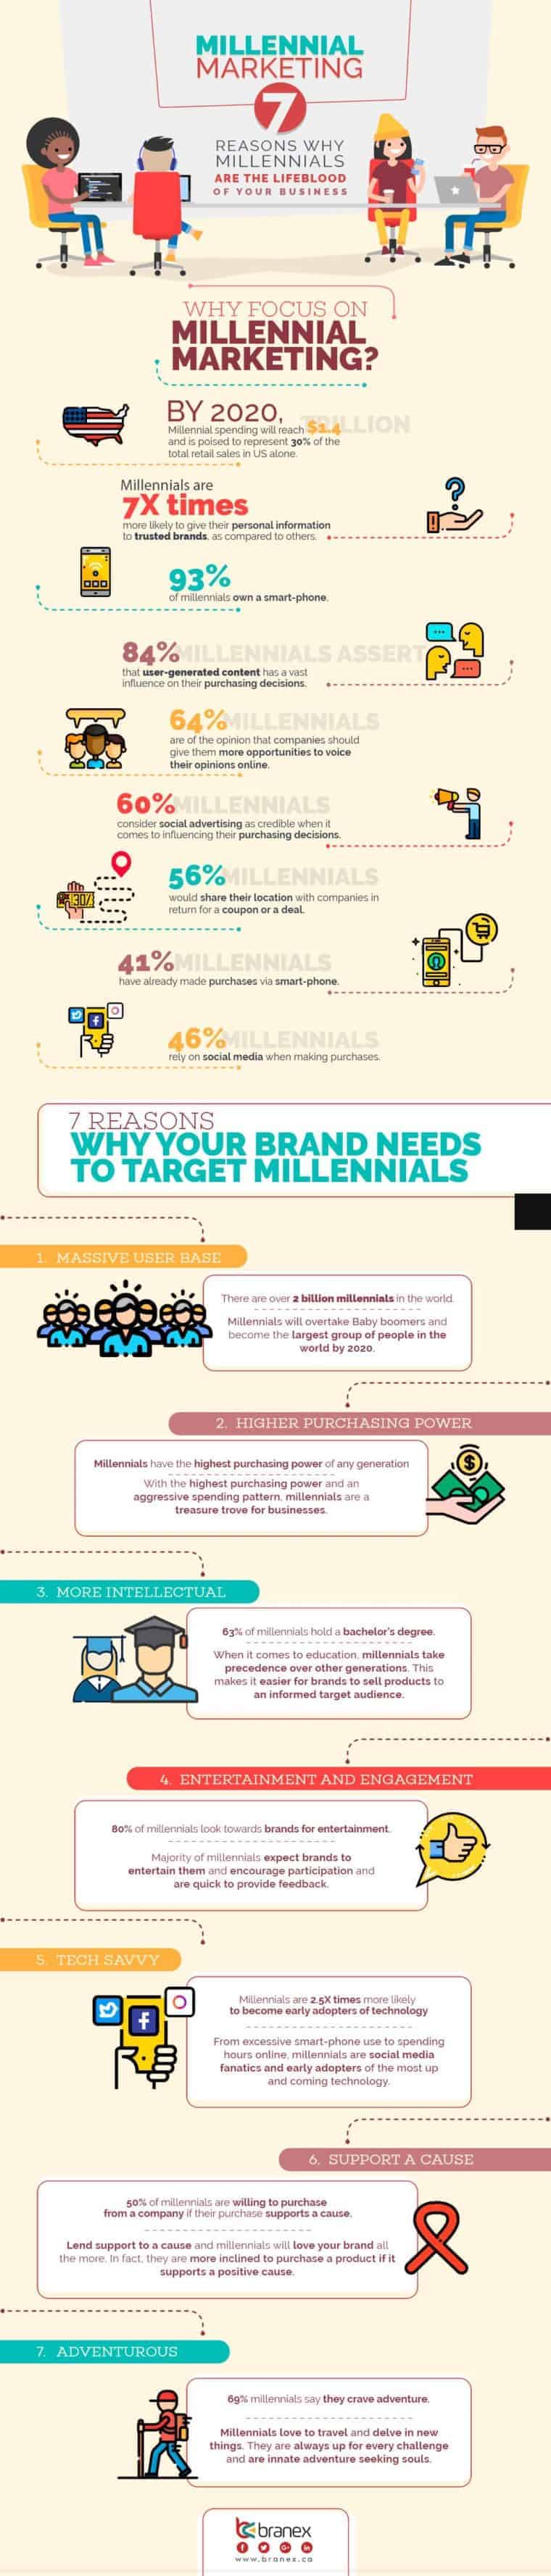 Millennial-marketing-7-reasons-why-millennials-are-the-lifeblood-of-your-business-1